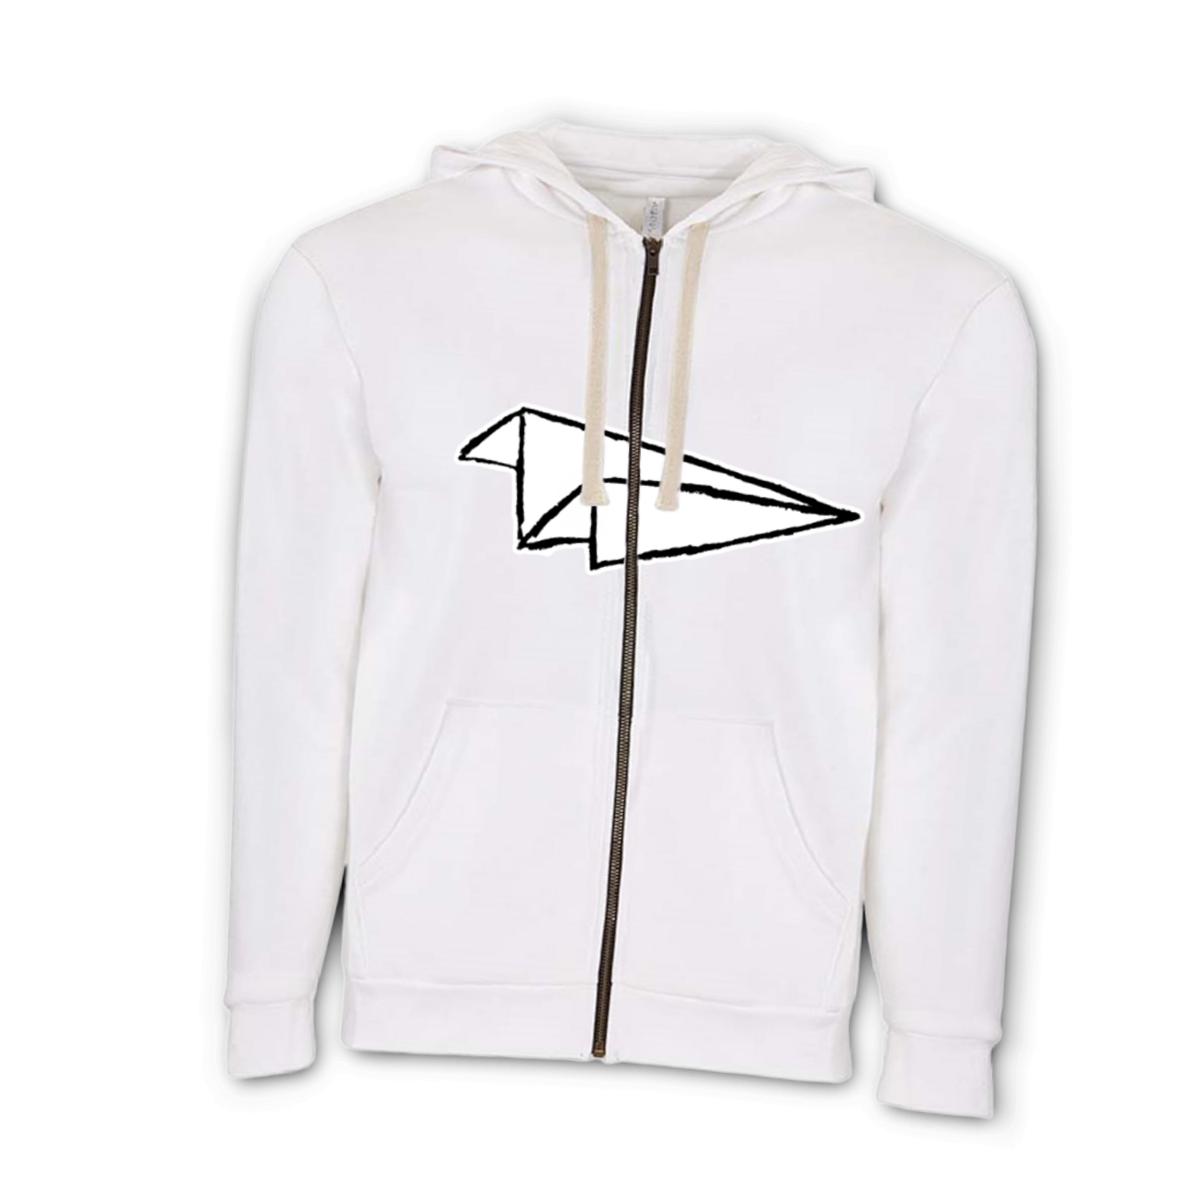 Airplane Sketch Unisex Zip Hoodie Double Extra Large white